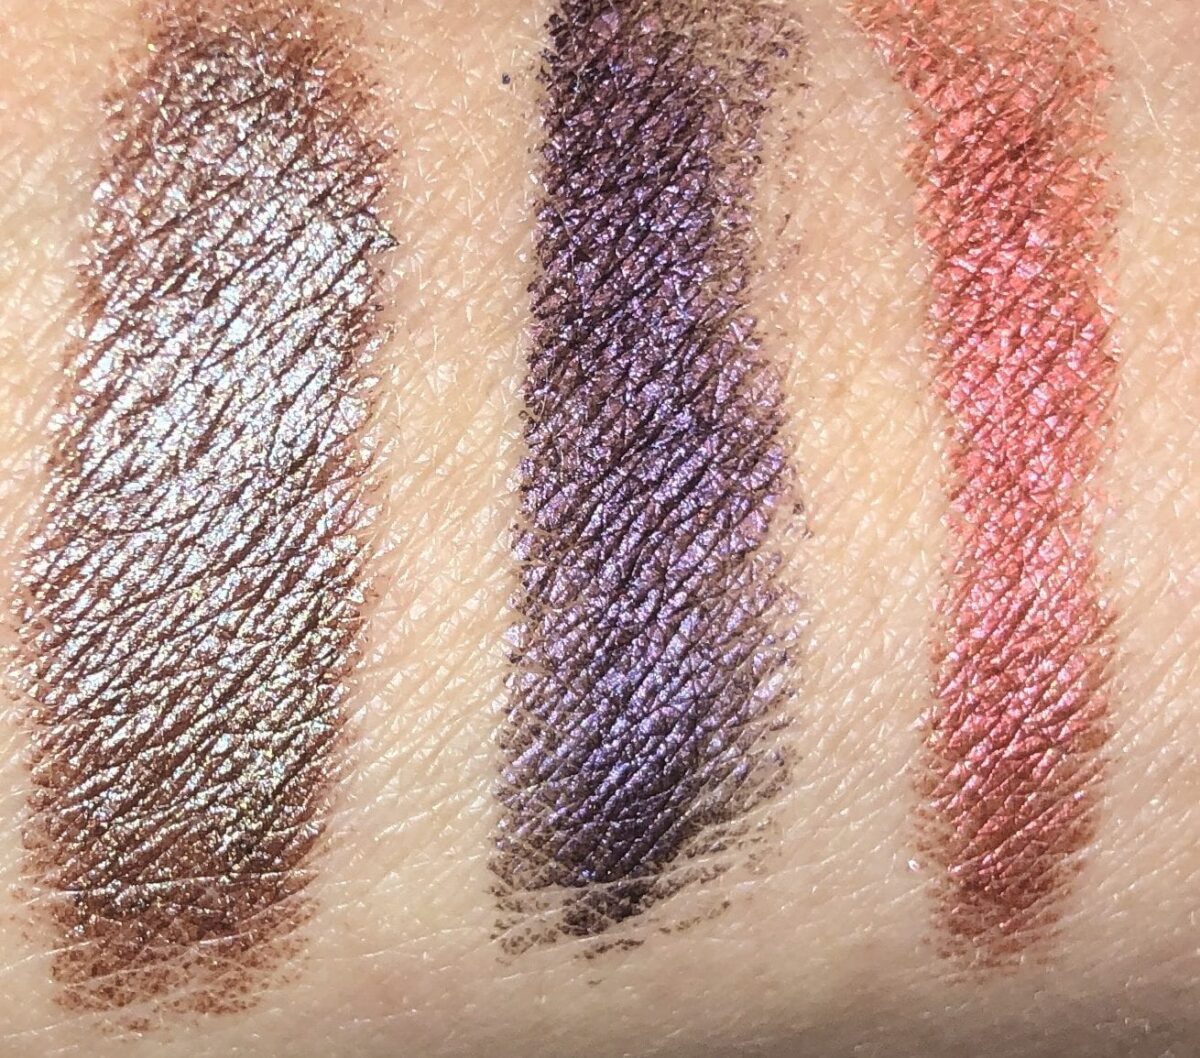 swatches top to bottom: PINK SAPPHIRE, AMETHYST, AND TOPAZ